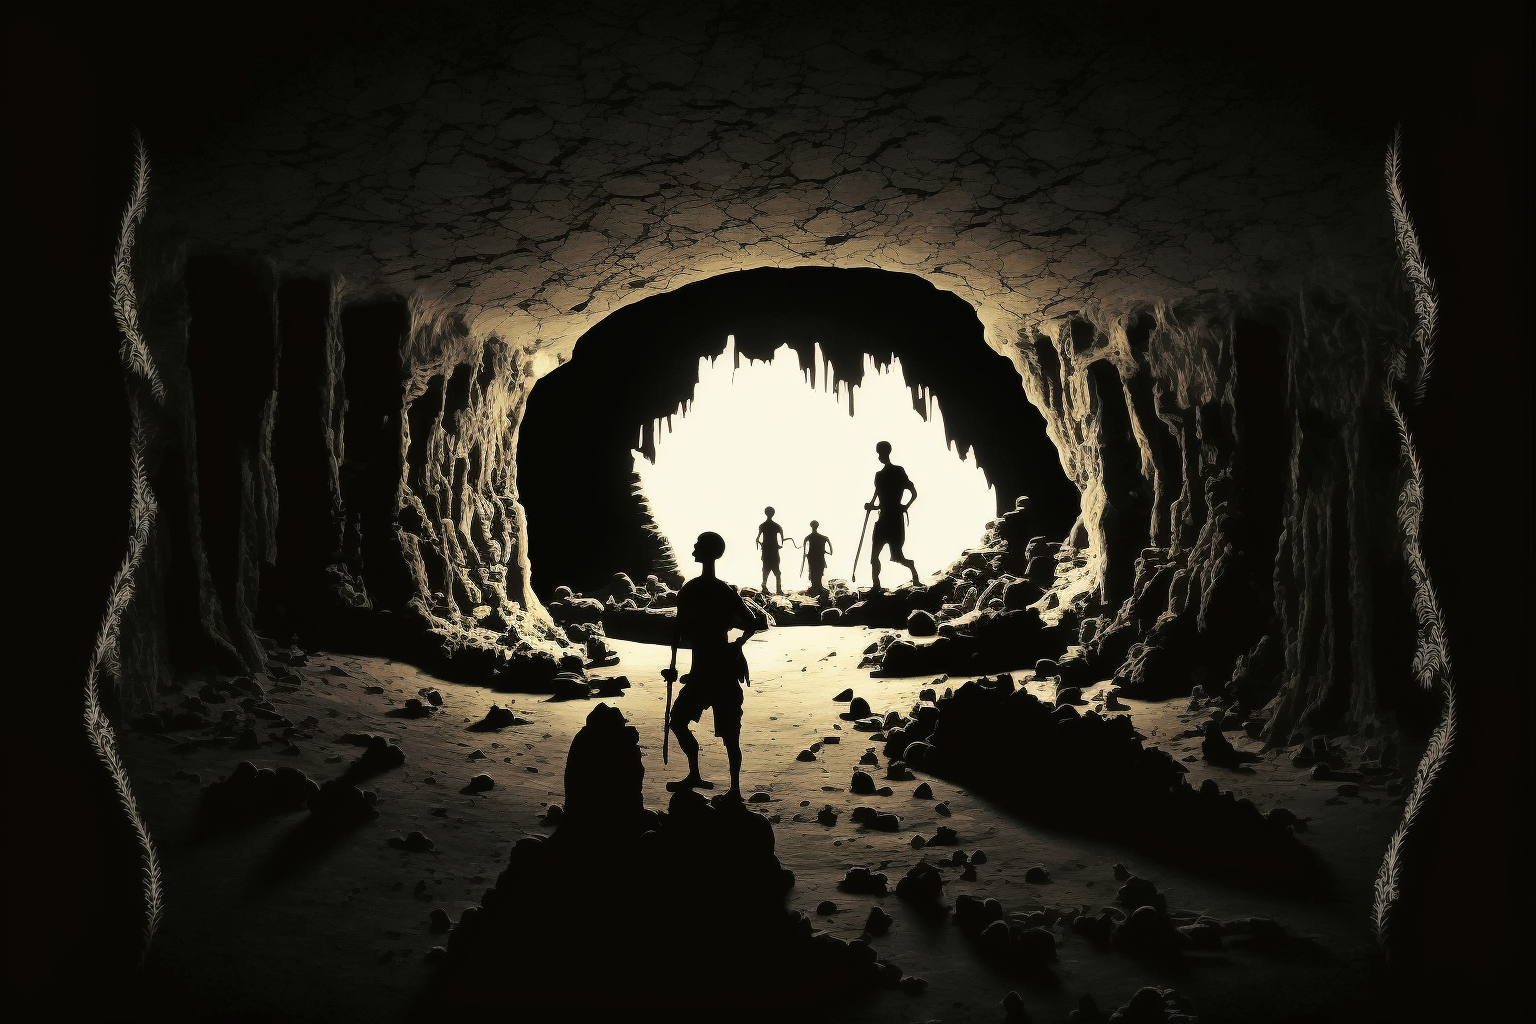 Toeasemymind audio sample: Plato's Allegory of the Cave